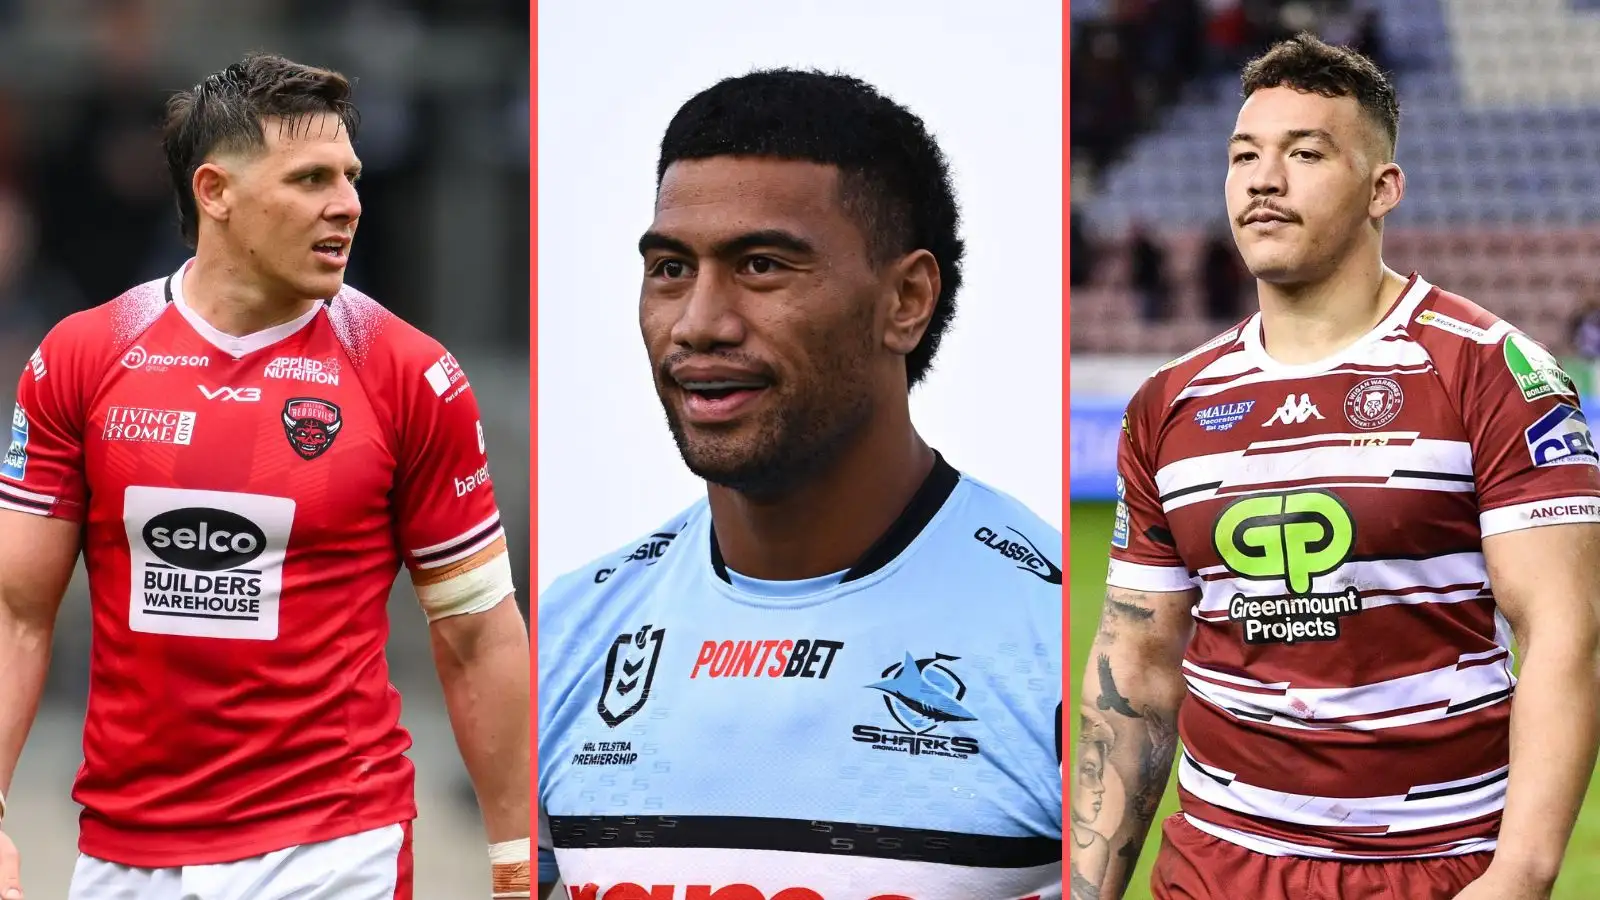 The superb 13 the USA could select if they chose from every eligible player, including Super League & NRL stars